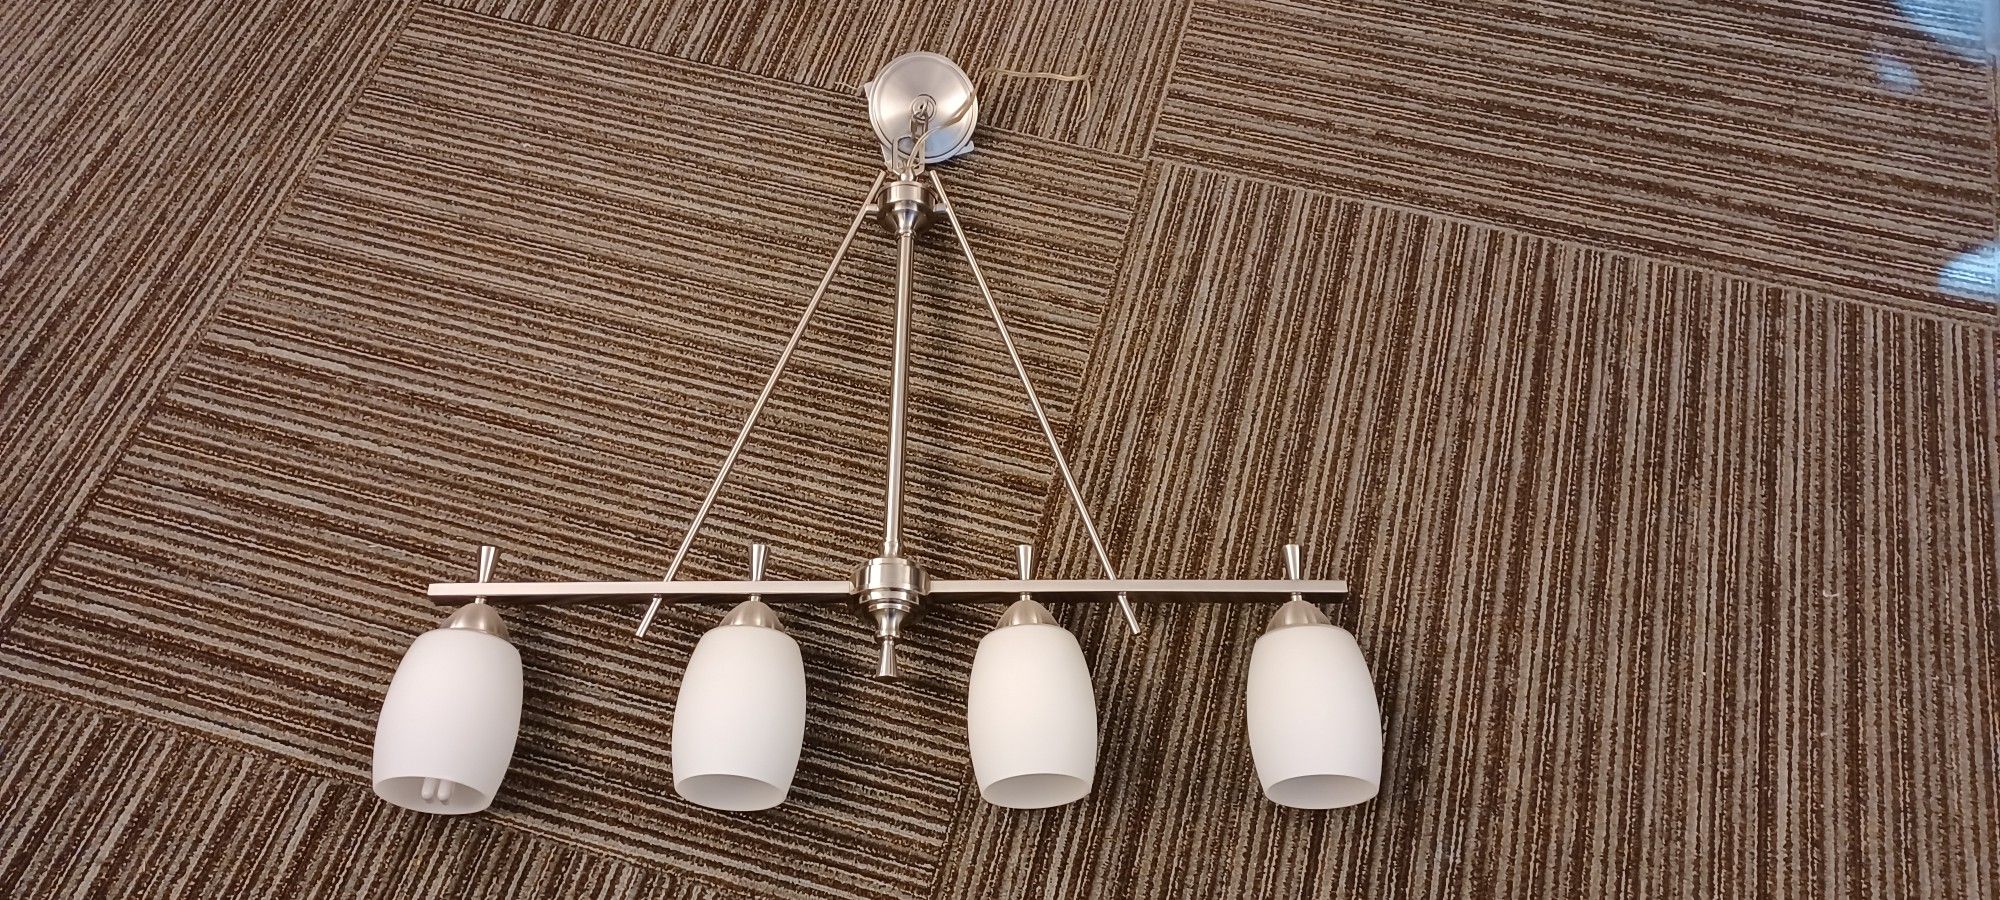 4-lamp Pendant Light Fixture - Complete & Ready To Hang